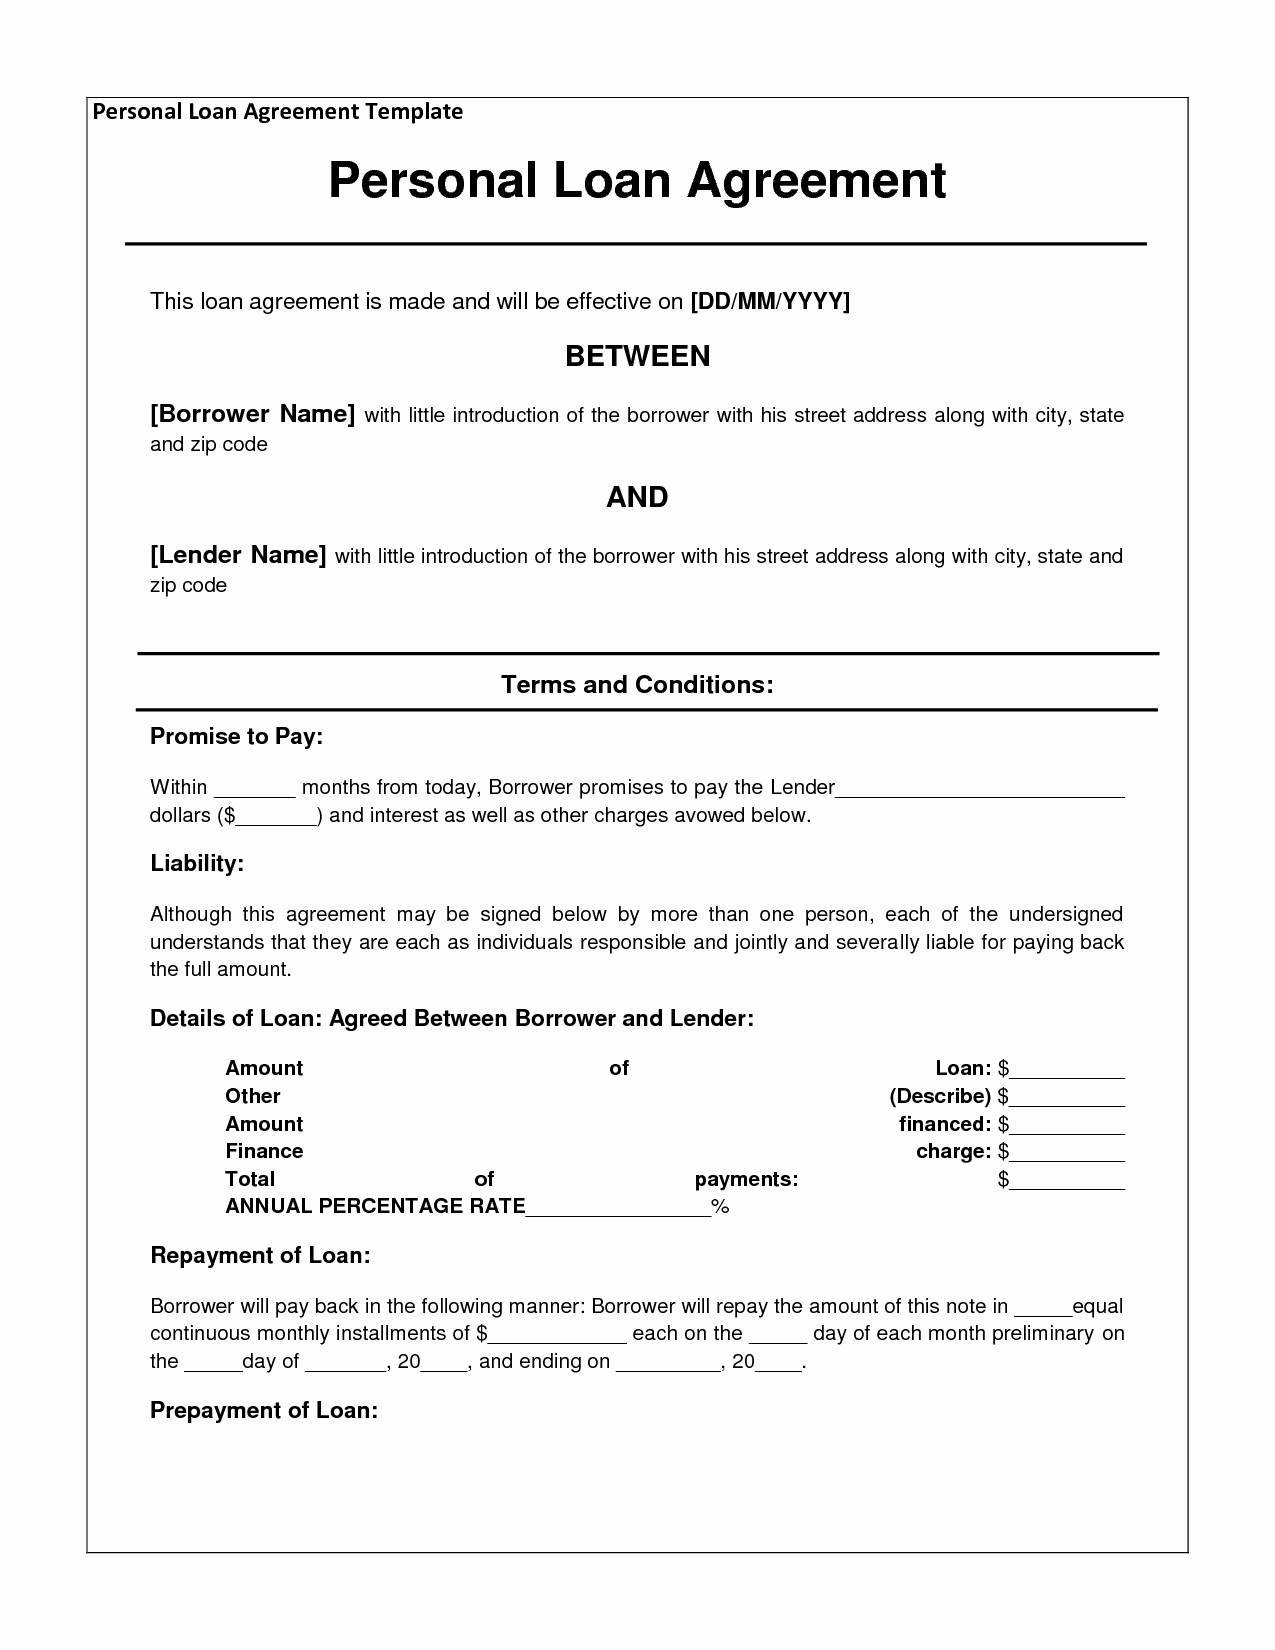 Free Personal Loan Agreement Template New 14 Loan Agreement Templates Excel Pdf formats